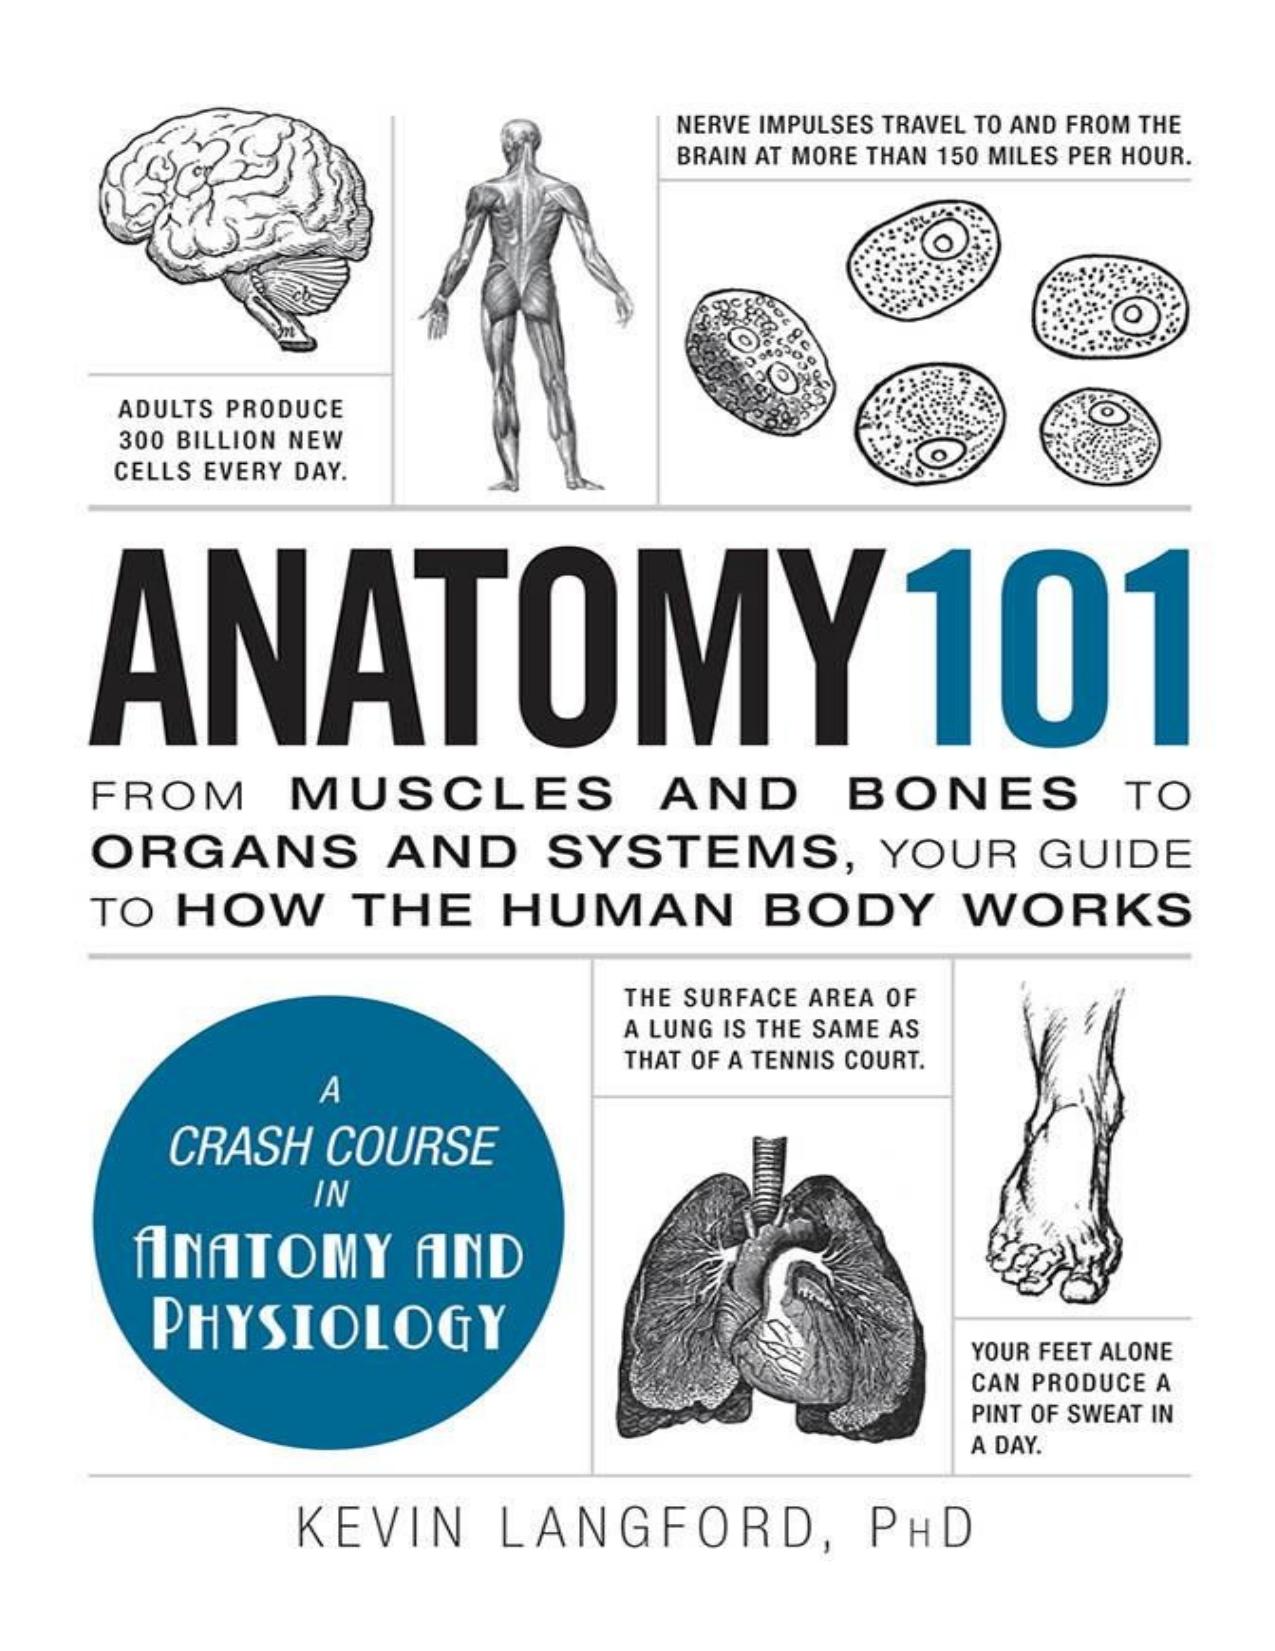 Anatomy 101: From Muscles and Bones to Organs and Systems, Your Guide to How the Human Body Works - PDFDrive.com